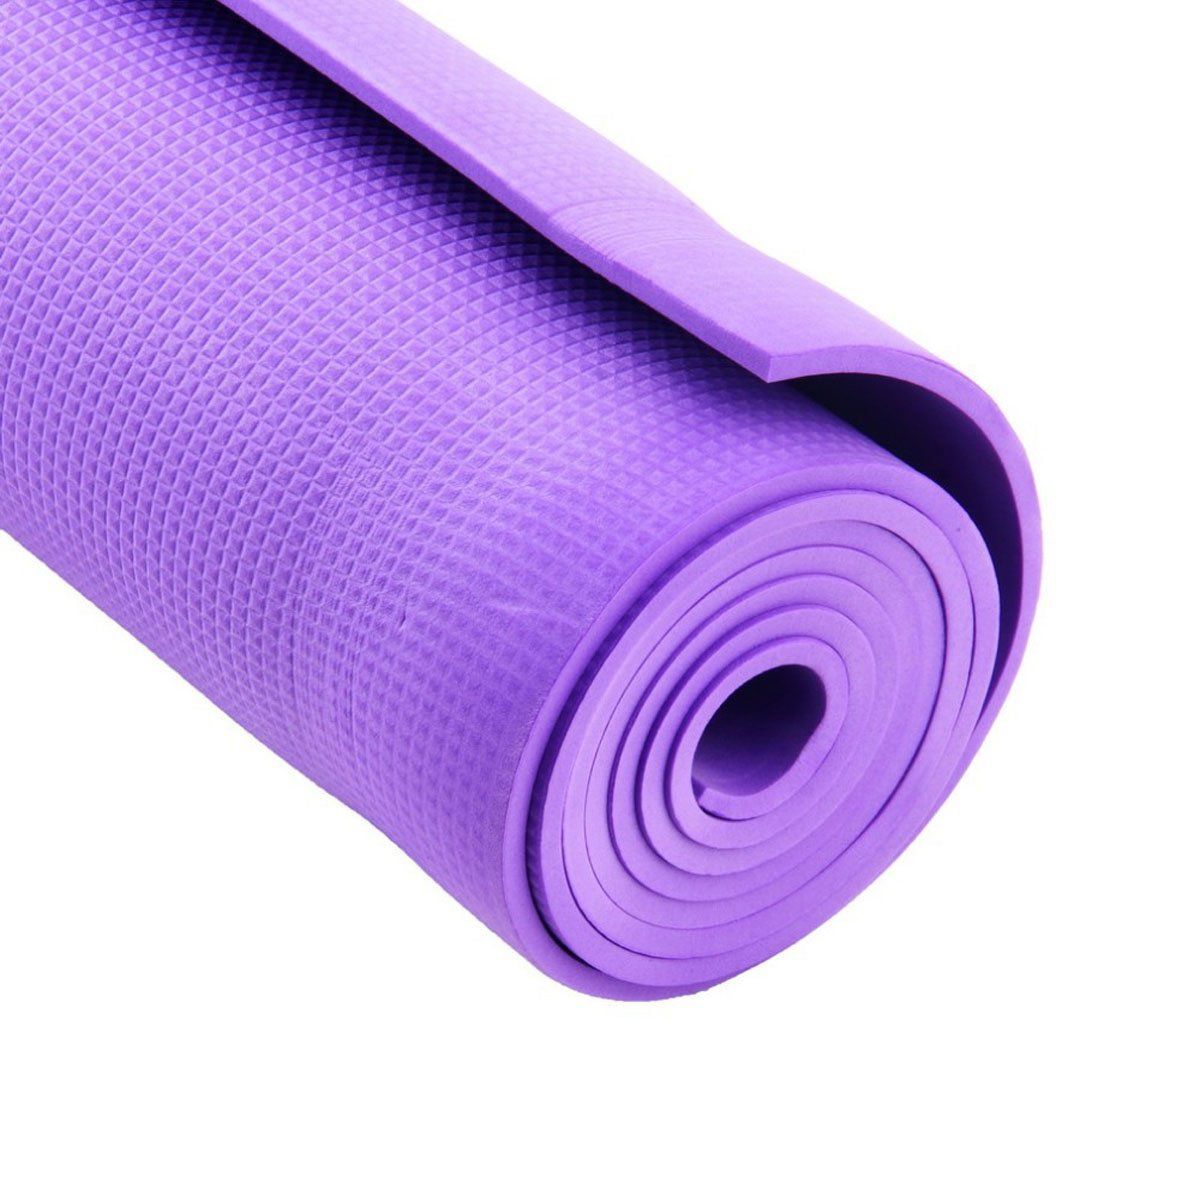 Gaiam Yoga Mat - Premium 5mm Print Thick Non Slip Exercise & Fitness Mat  for All Types of Yoga, Pilates & Floor Workouts (68 x 24 x 5mm)